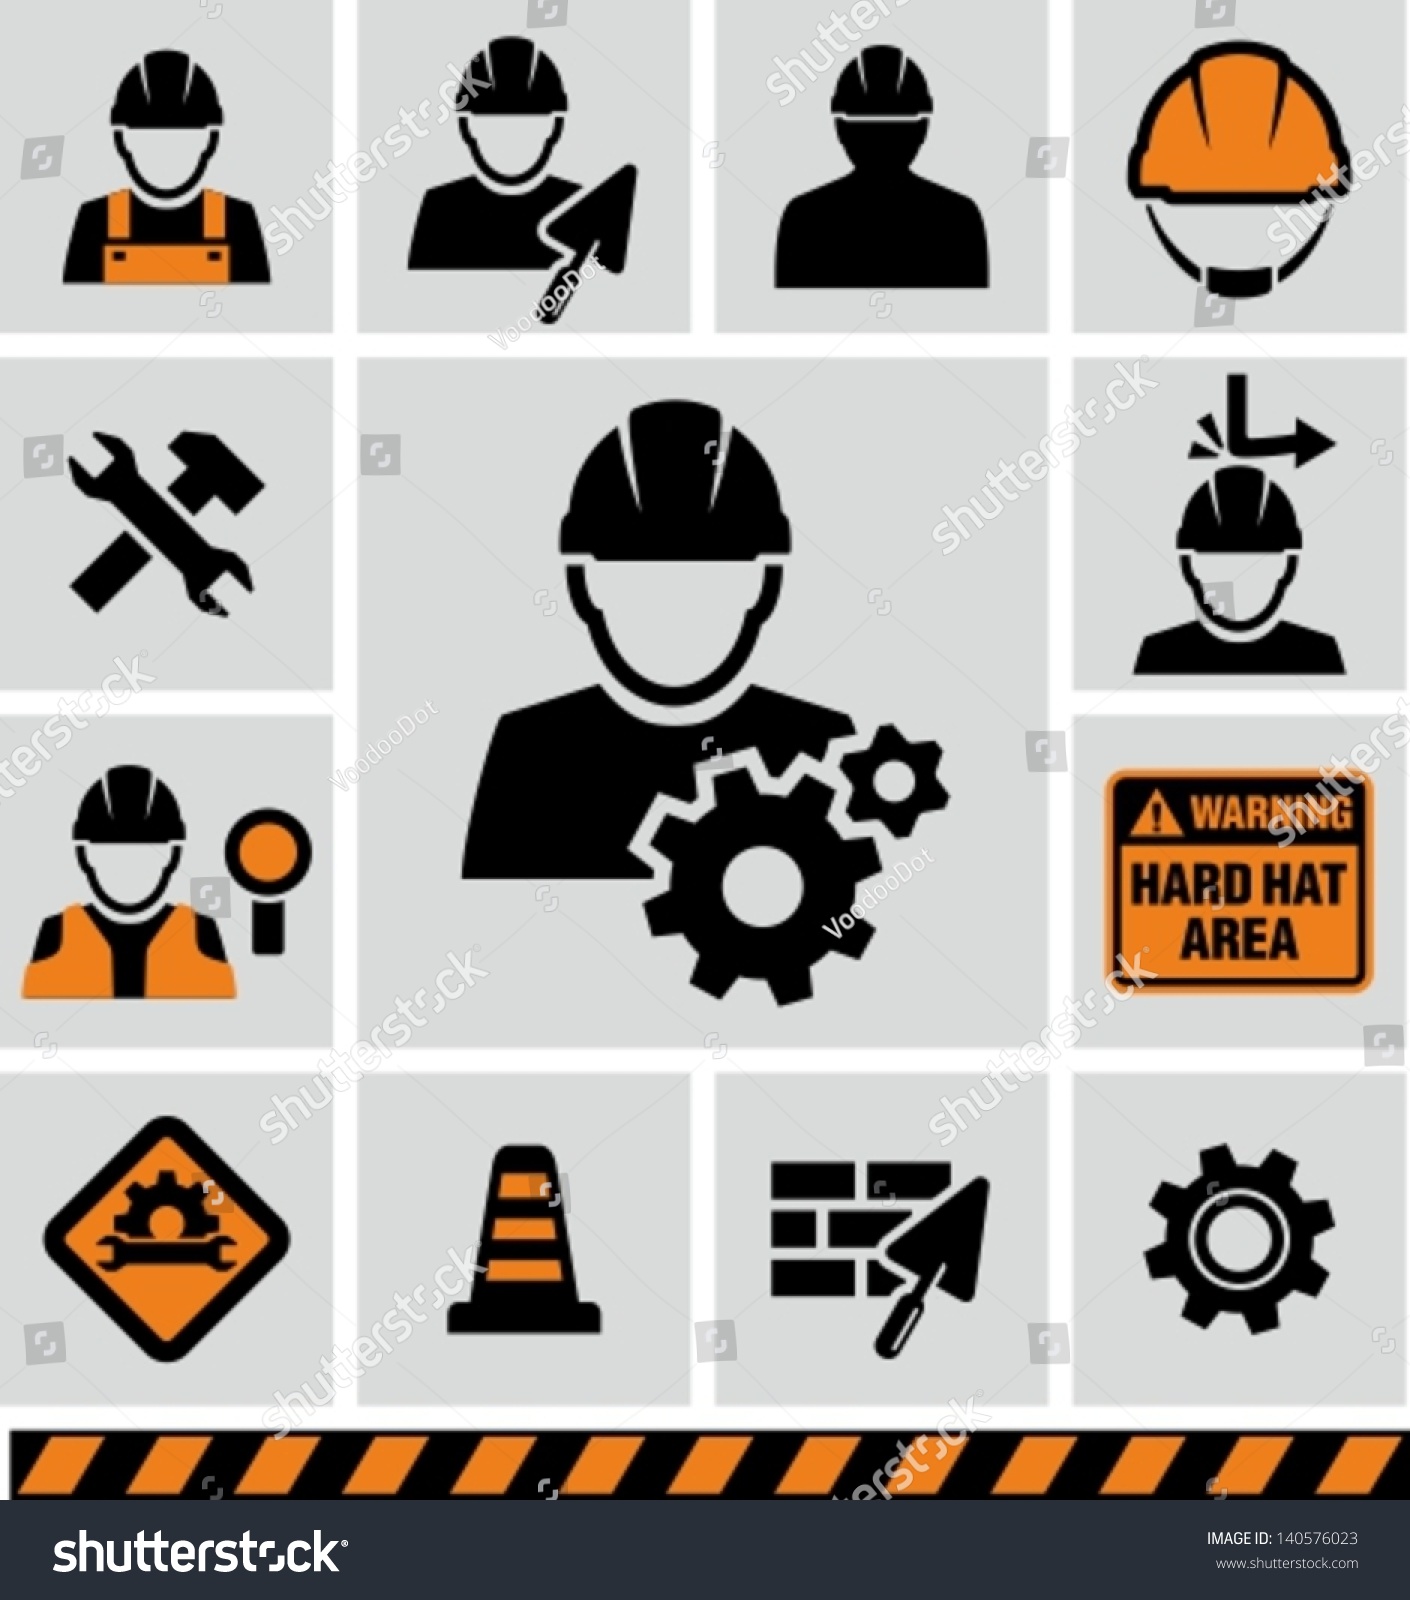 industrial worker clipart - photo #8